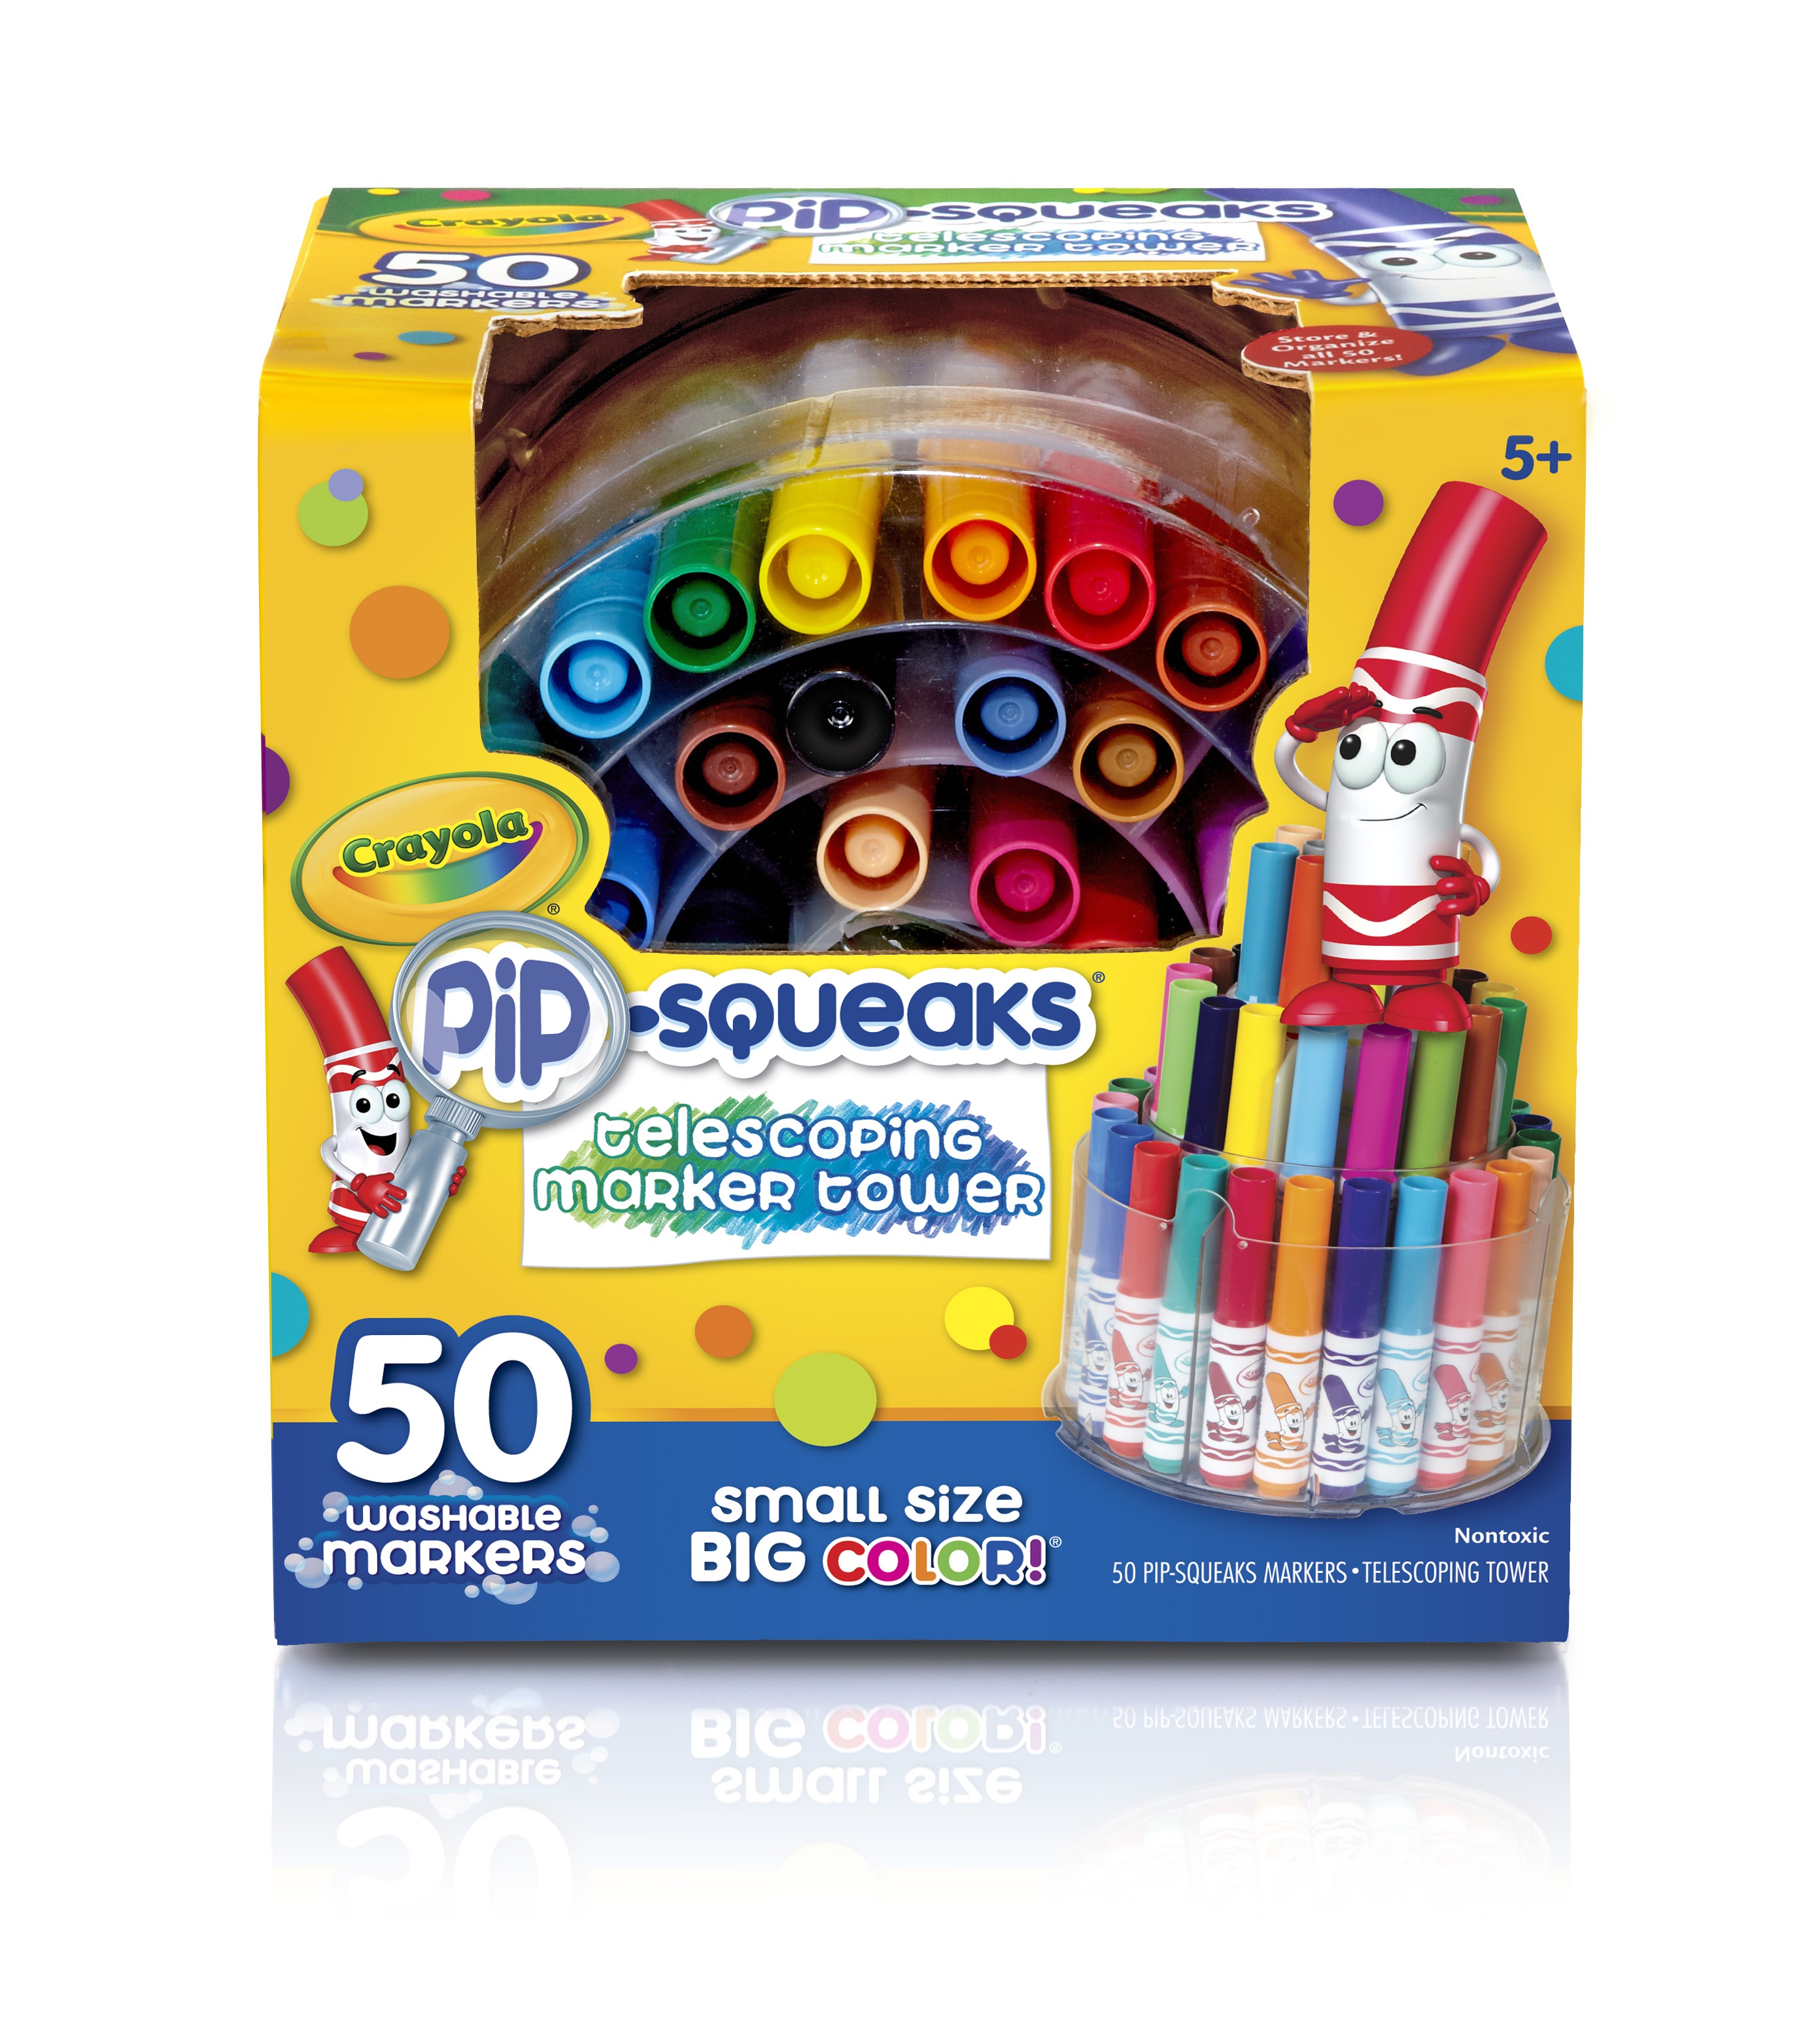 Crayola Pip-Squeaks Telescoping Mini Marker Tower, Washable Markers, 50 markers